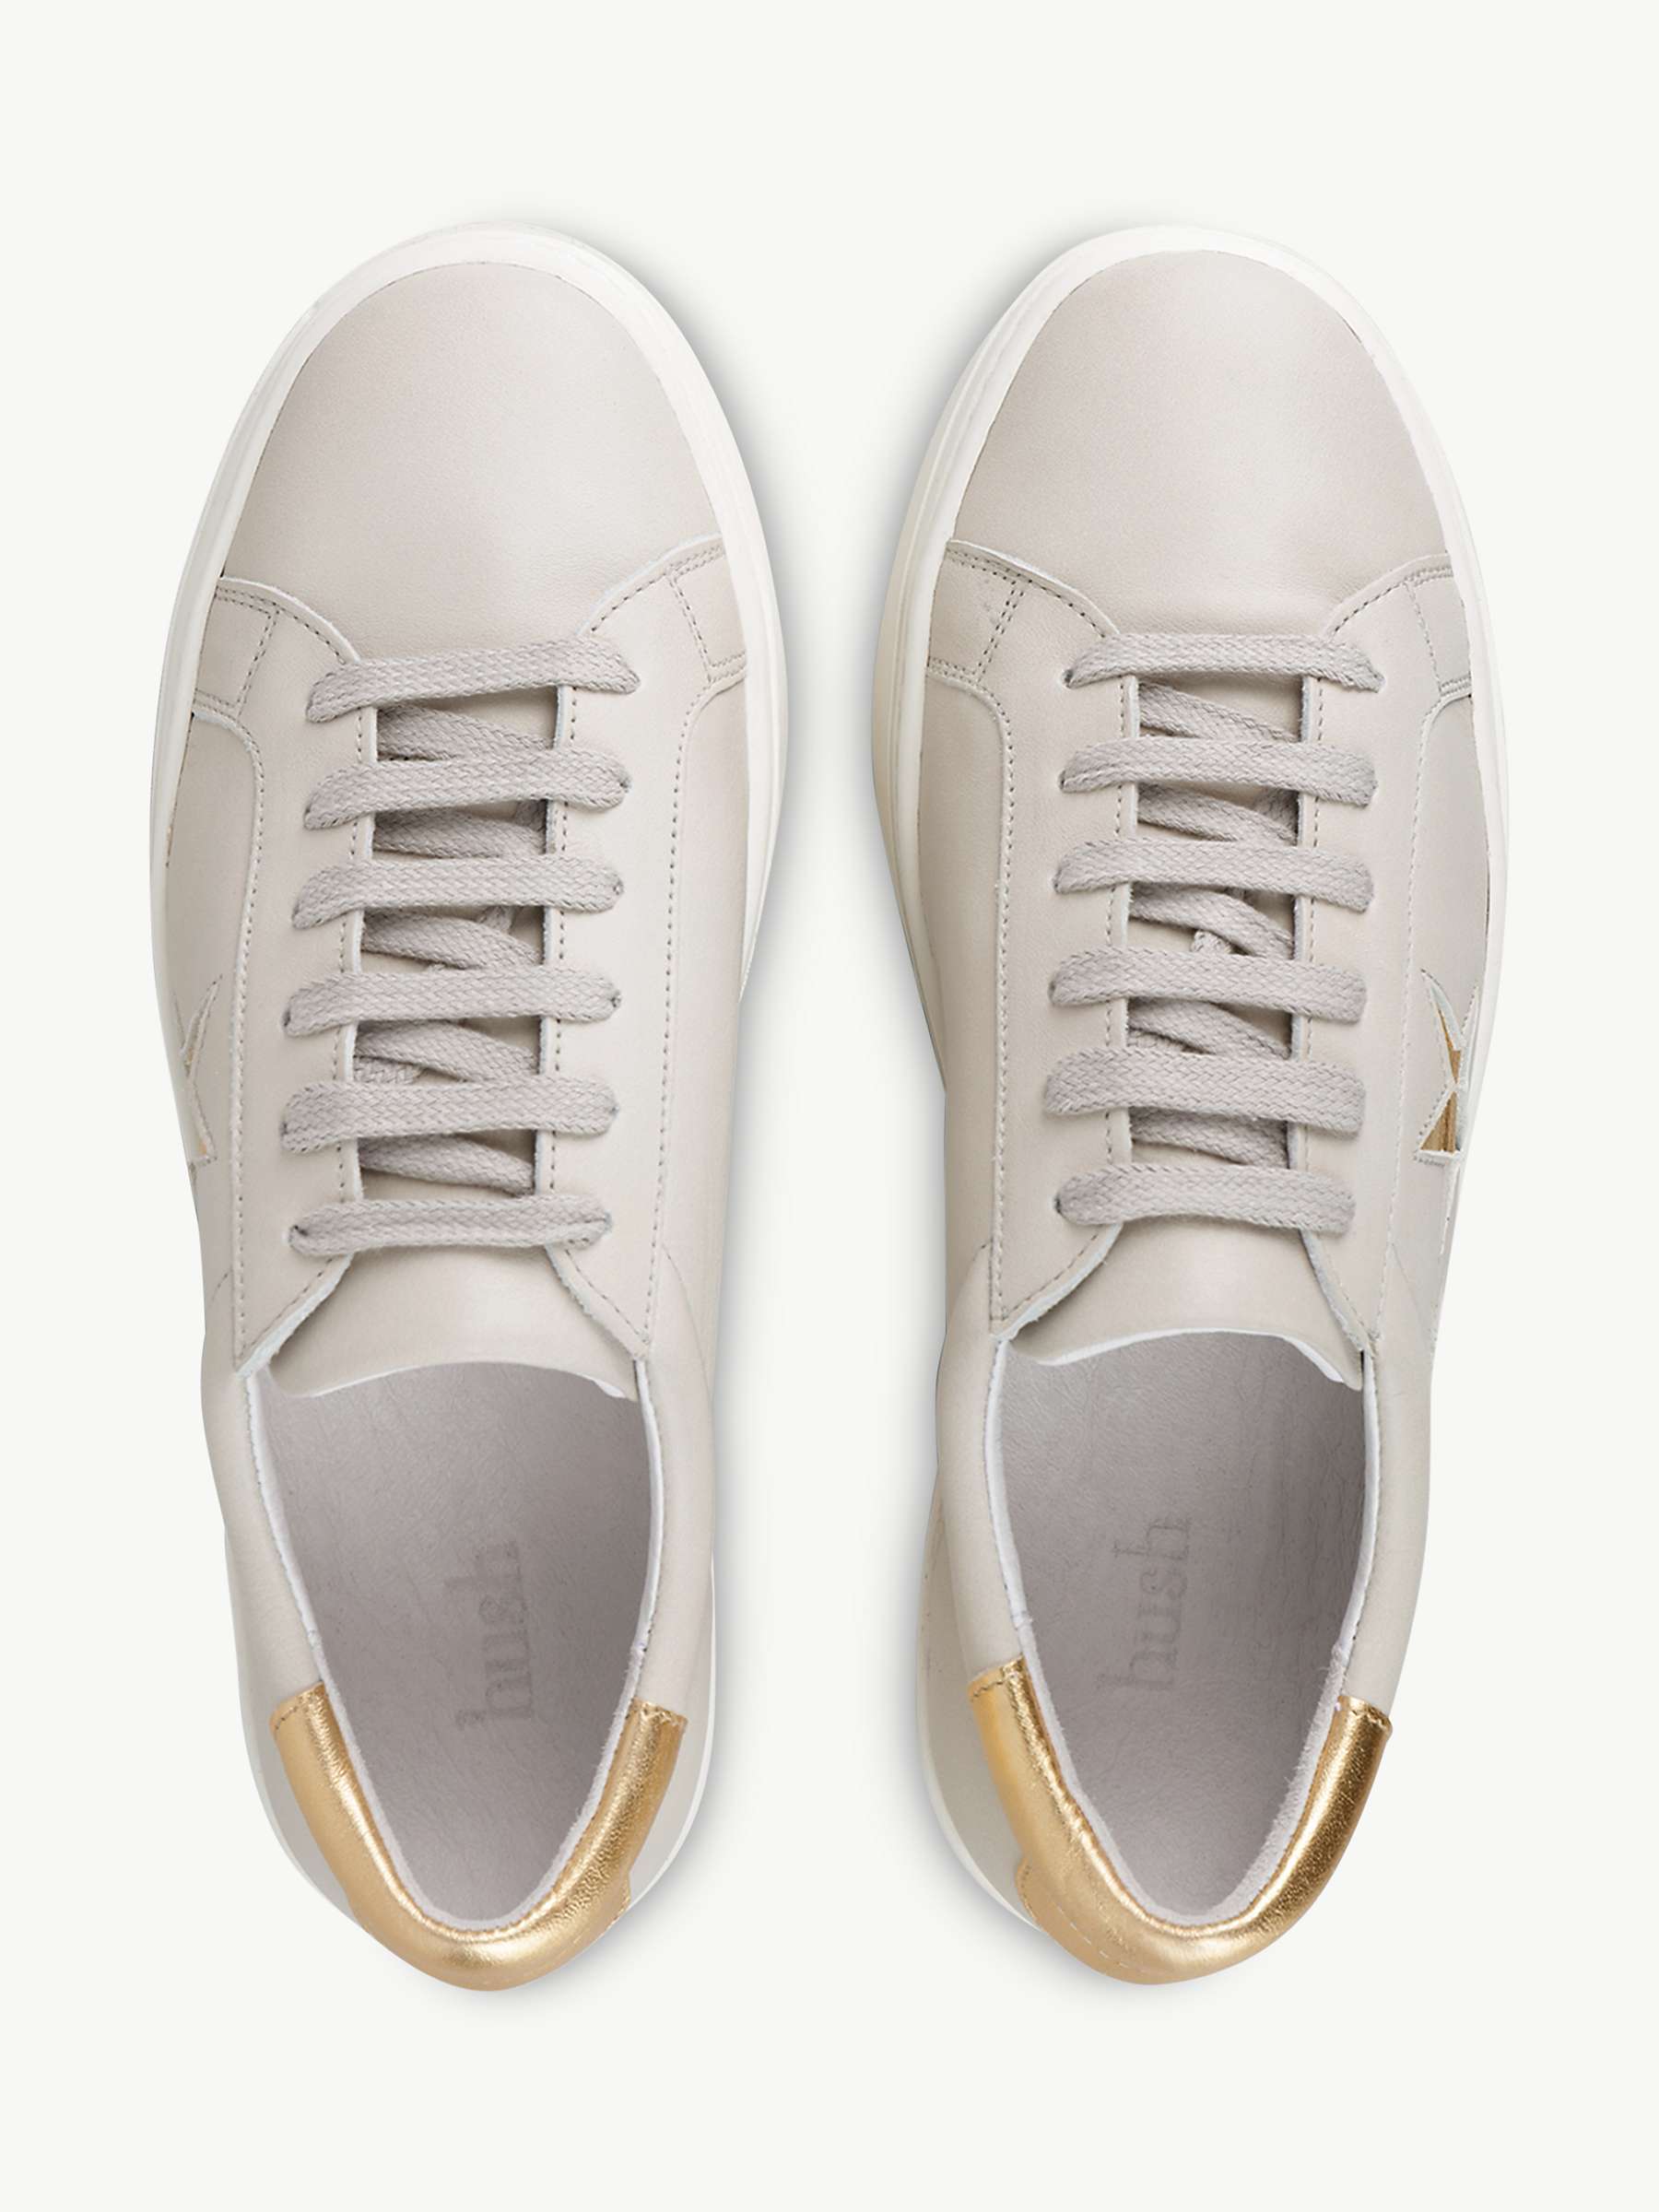 Buy hush Malton Star Low Top Trainers, Grey/Leather Gold Online at johnlewis.com